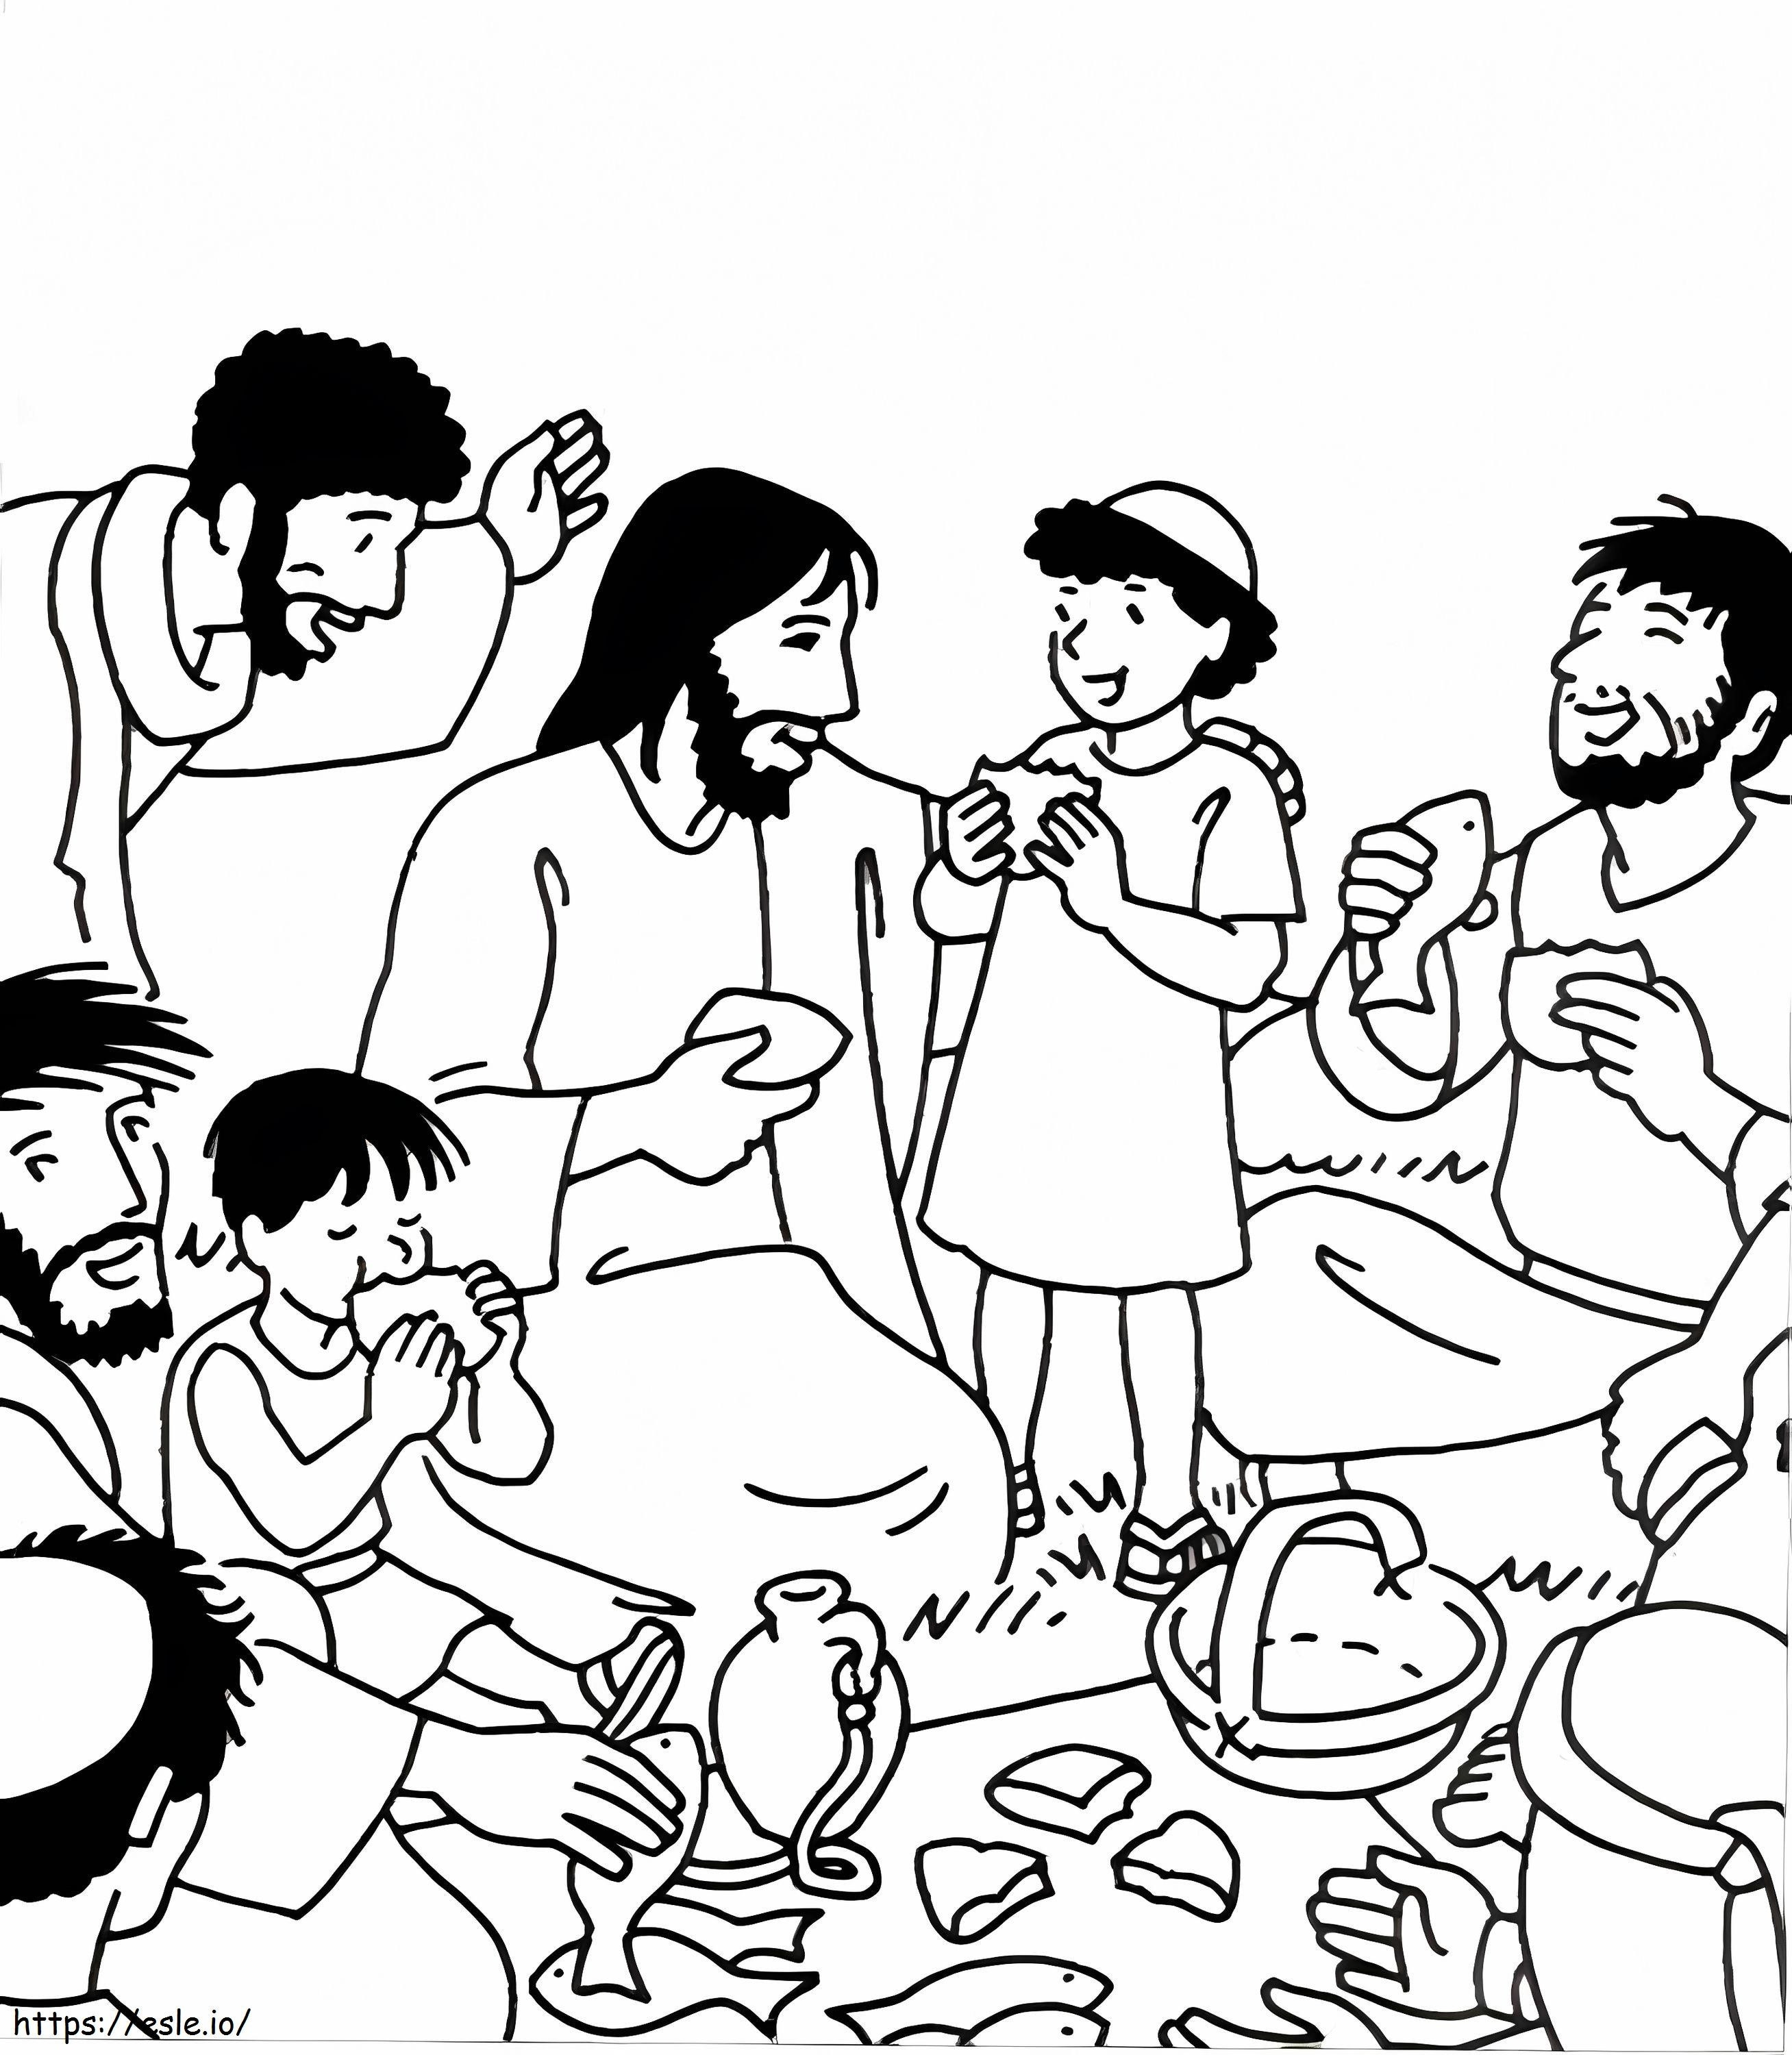 Feeds 5000 Bible coloring page